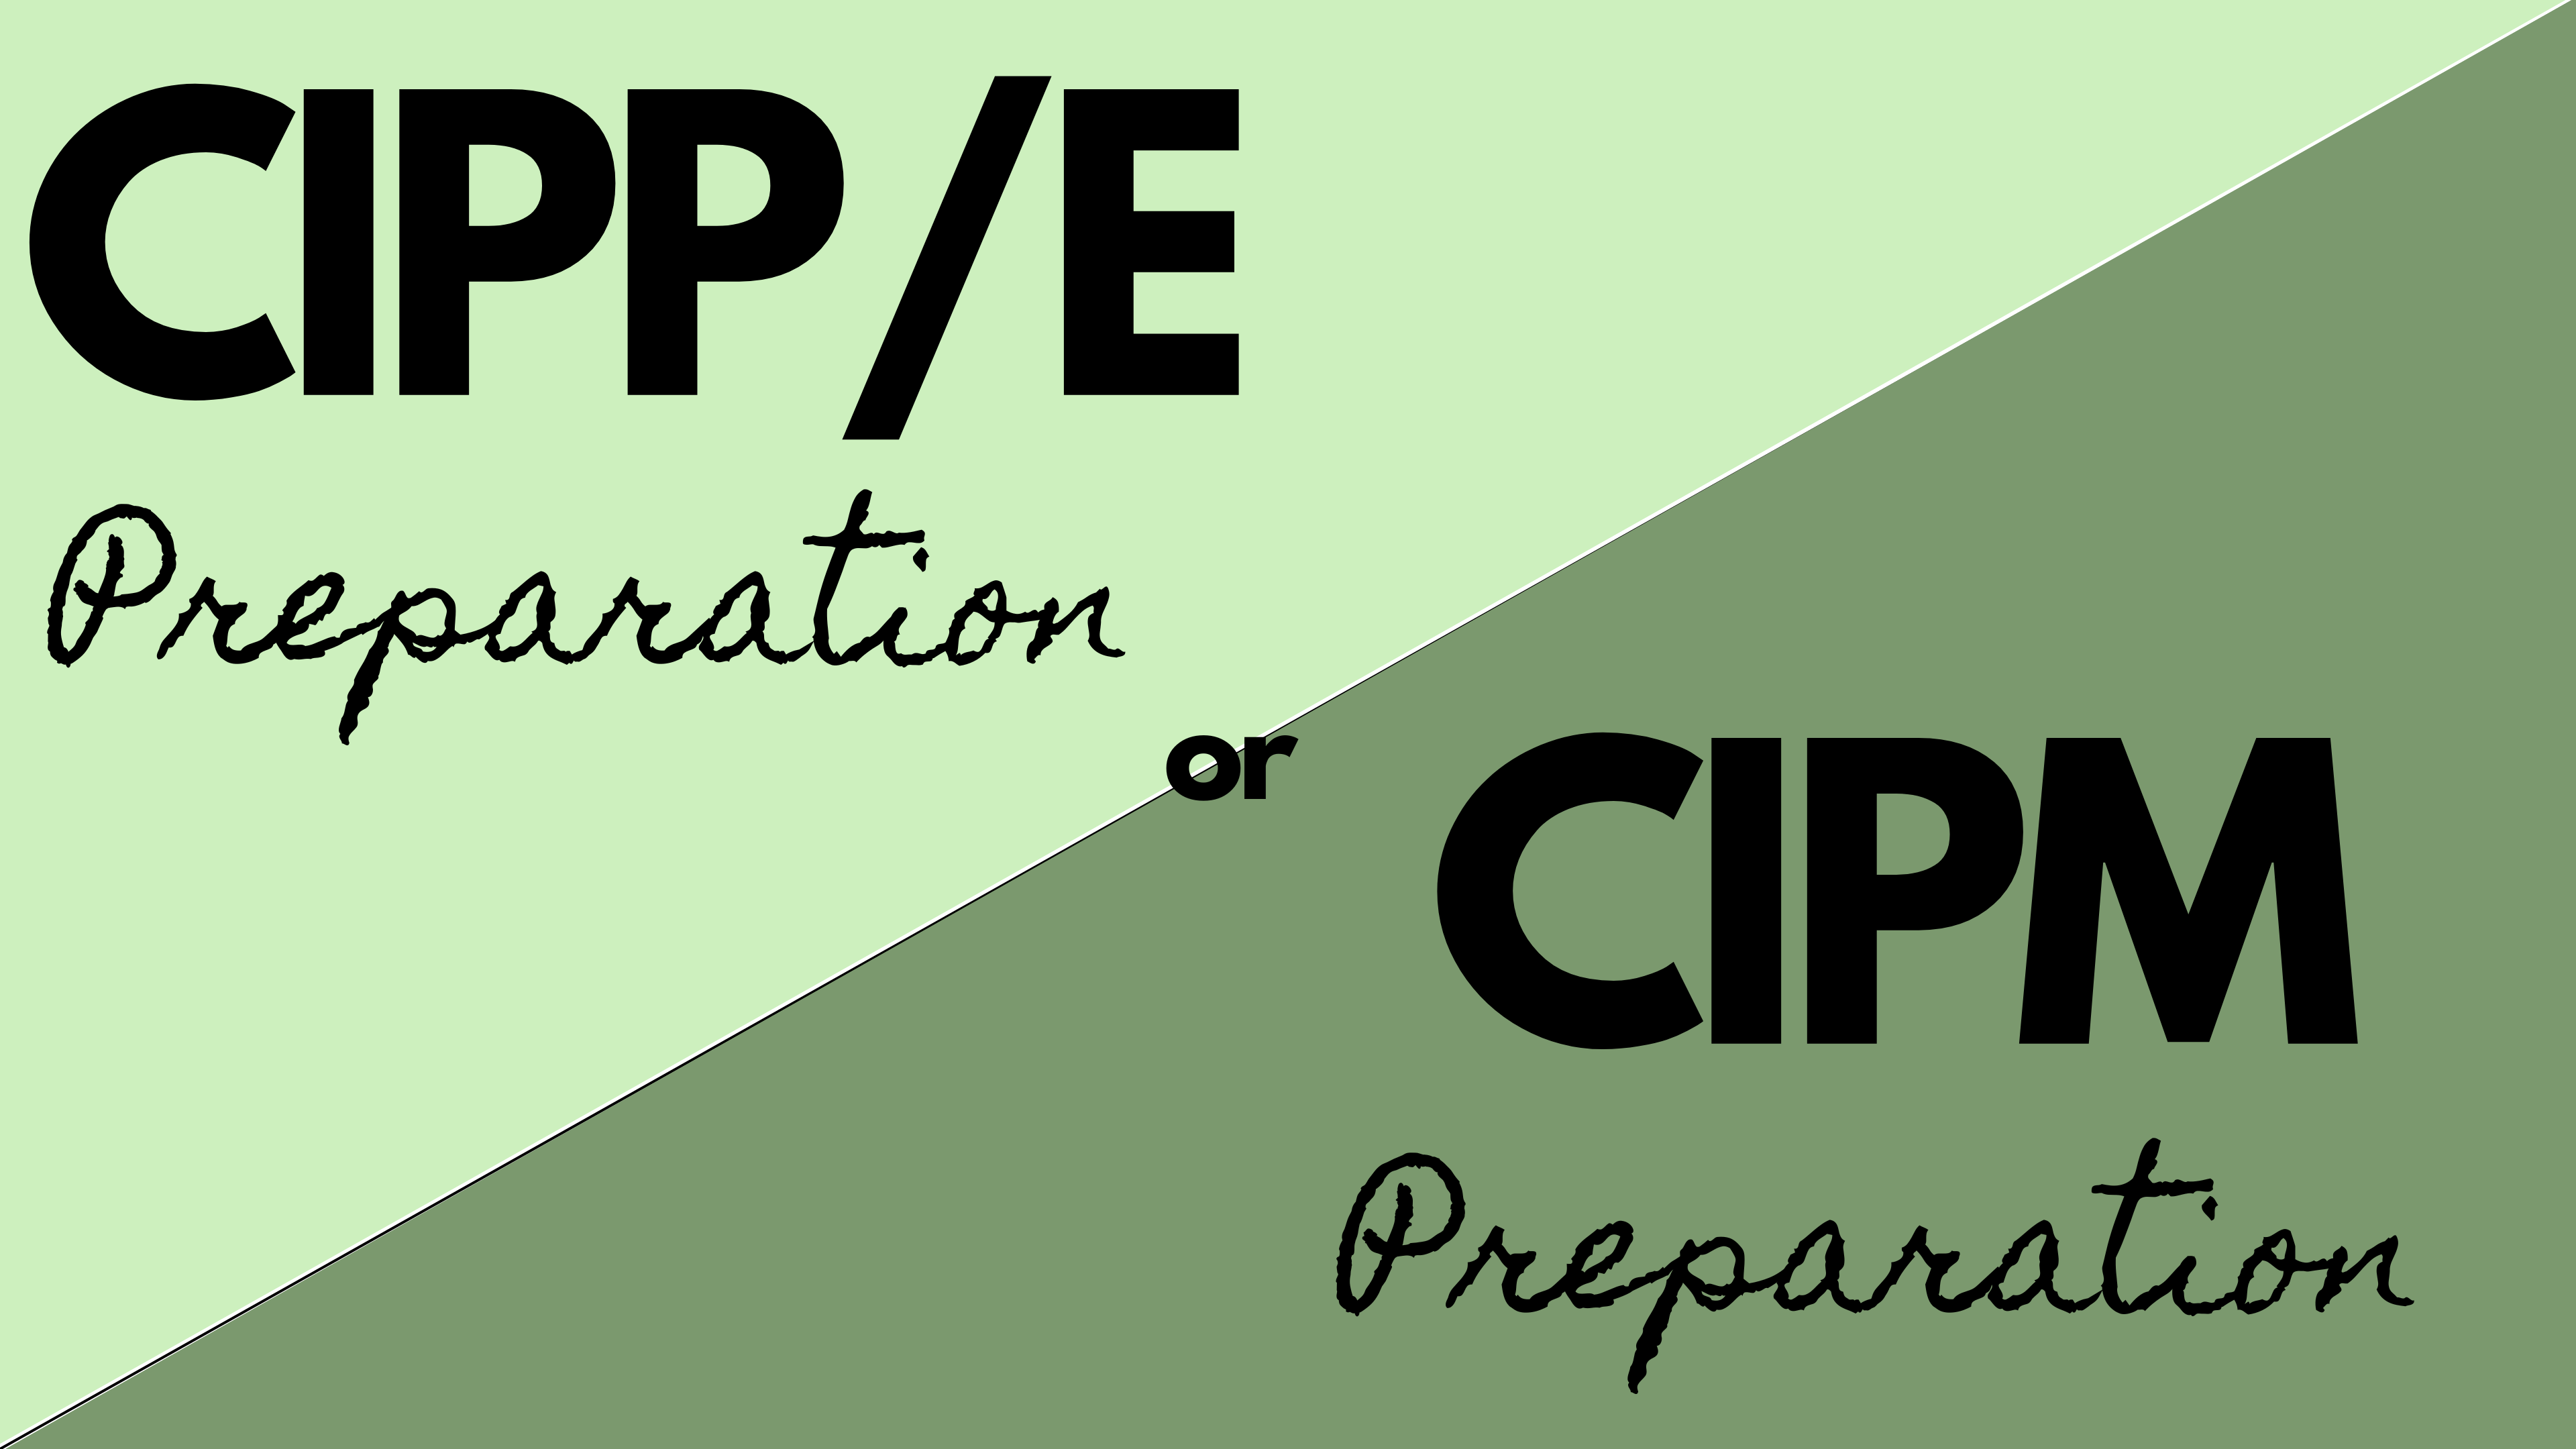 Copy of CIPPE - Preparation Teachable Image